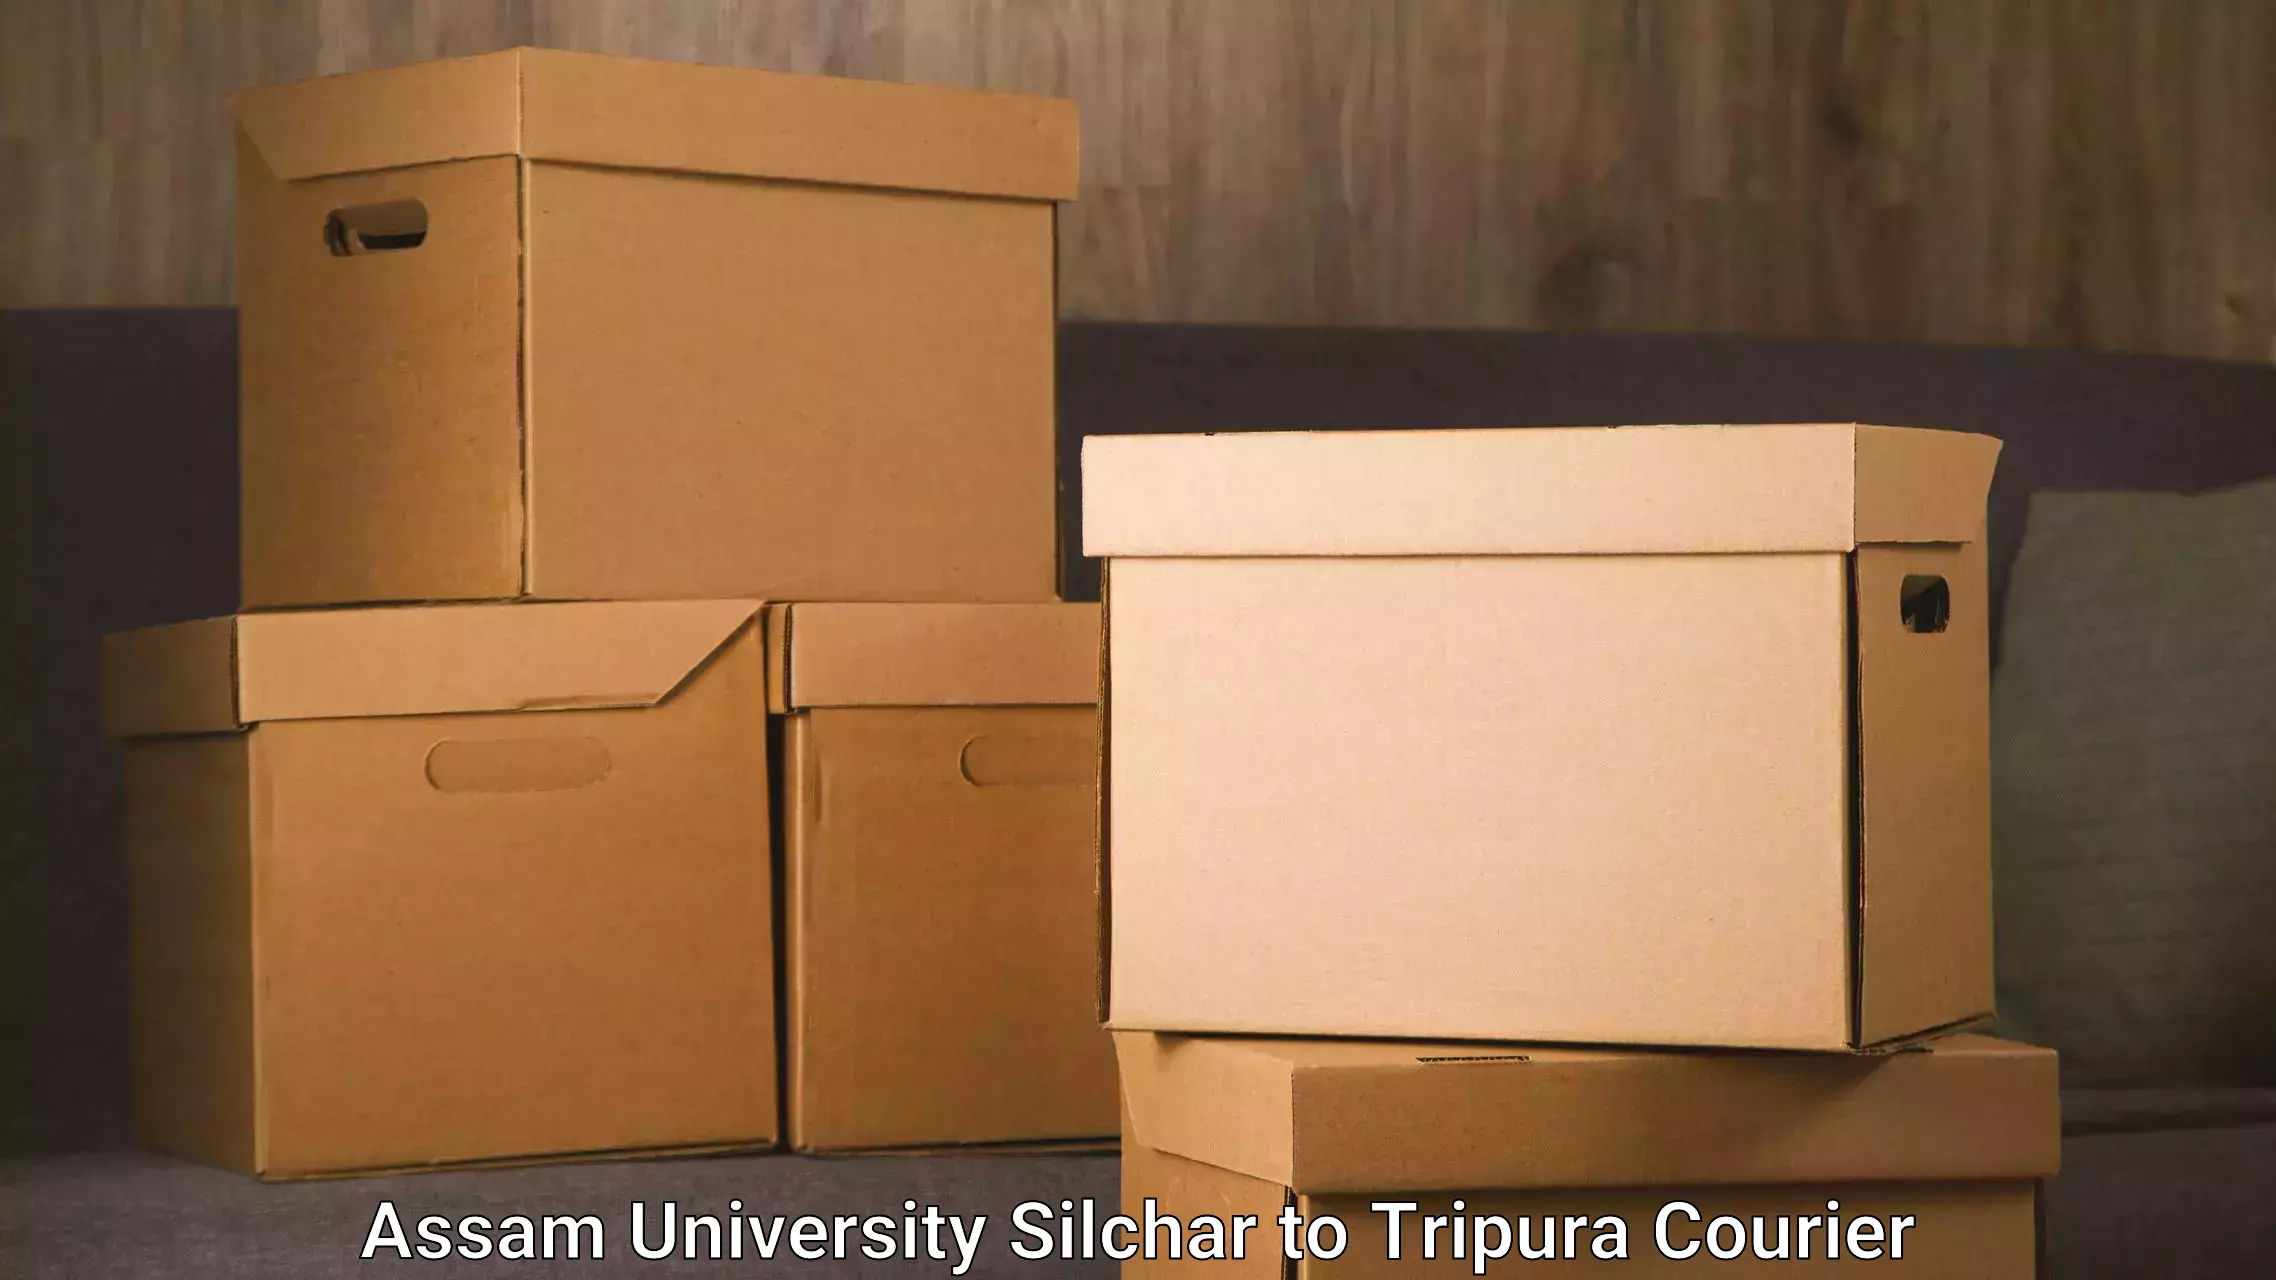 Reliable courier service Assam University Silchar to Aambasa